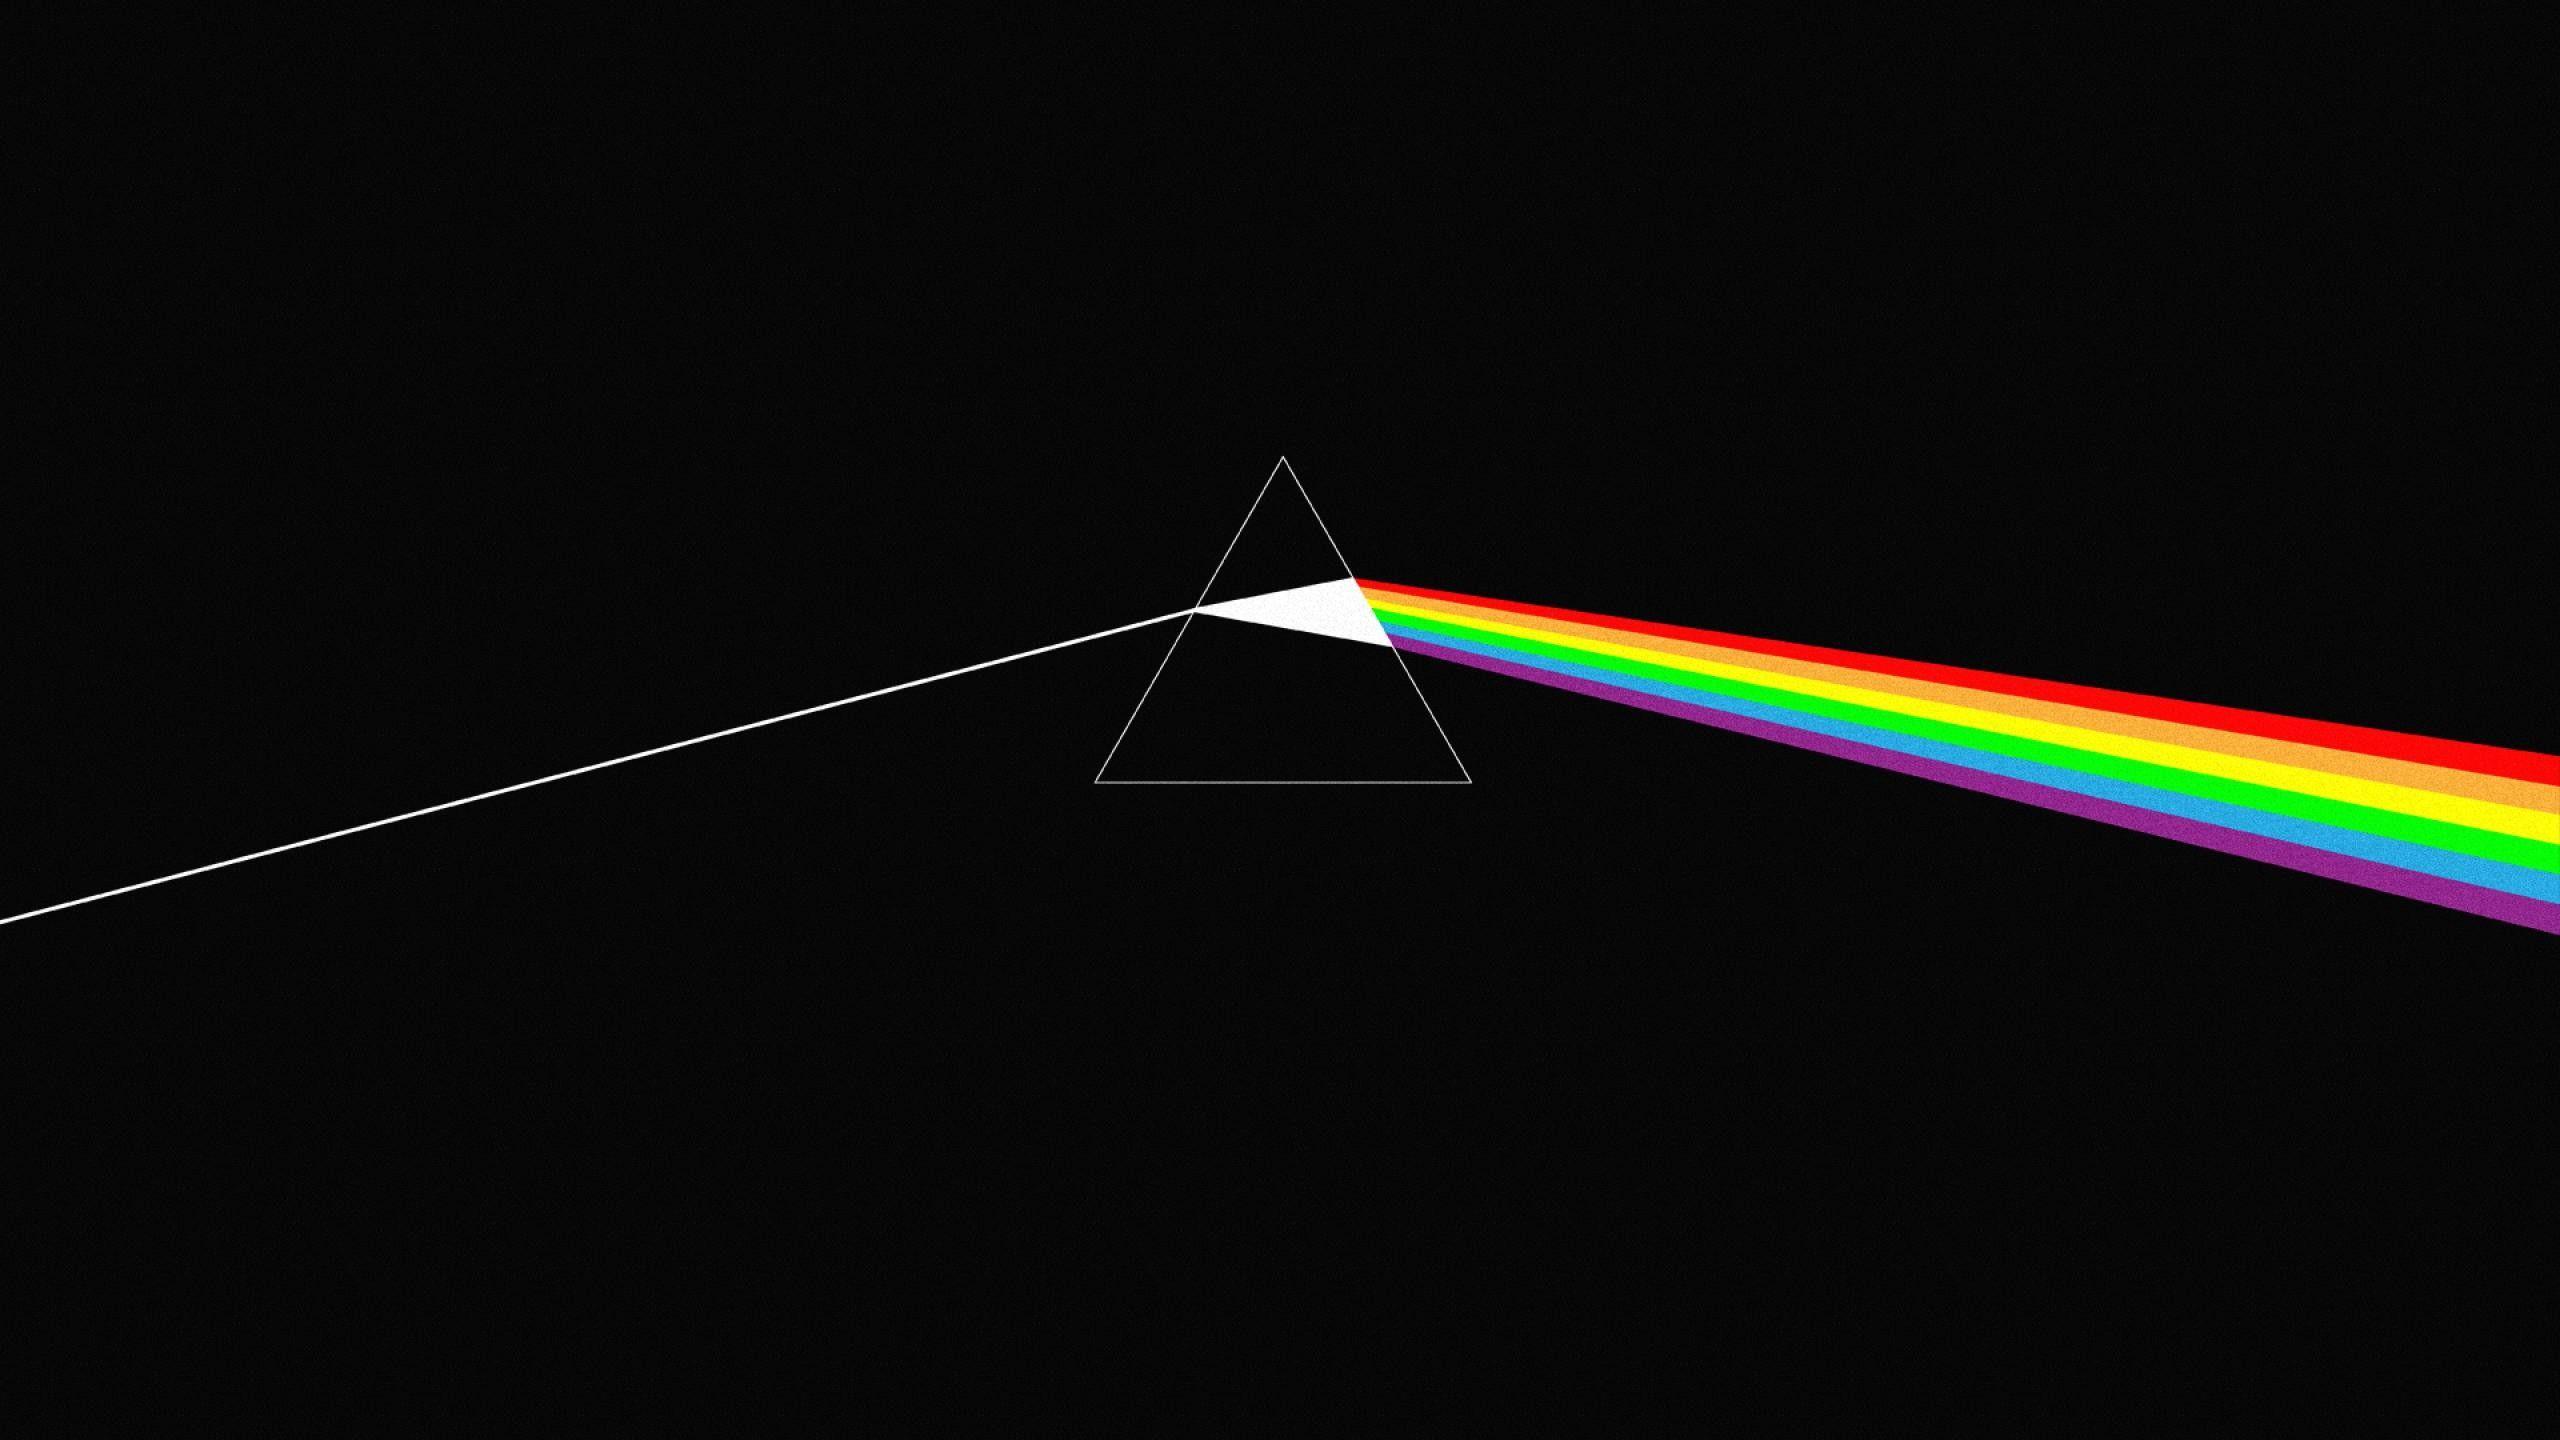 Dark Side of the Moon Wallpapers